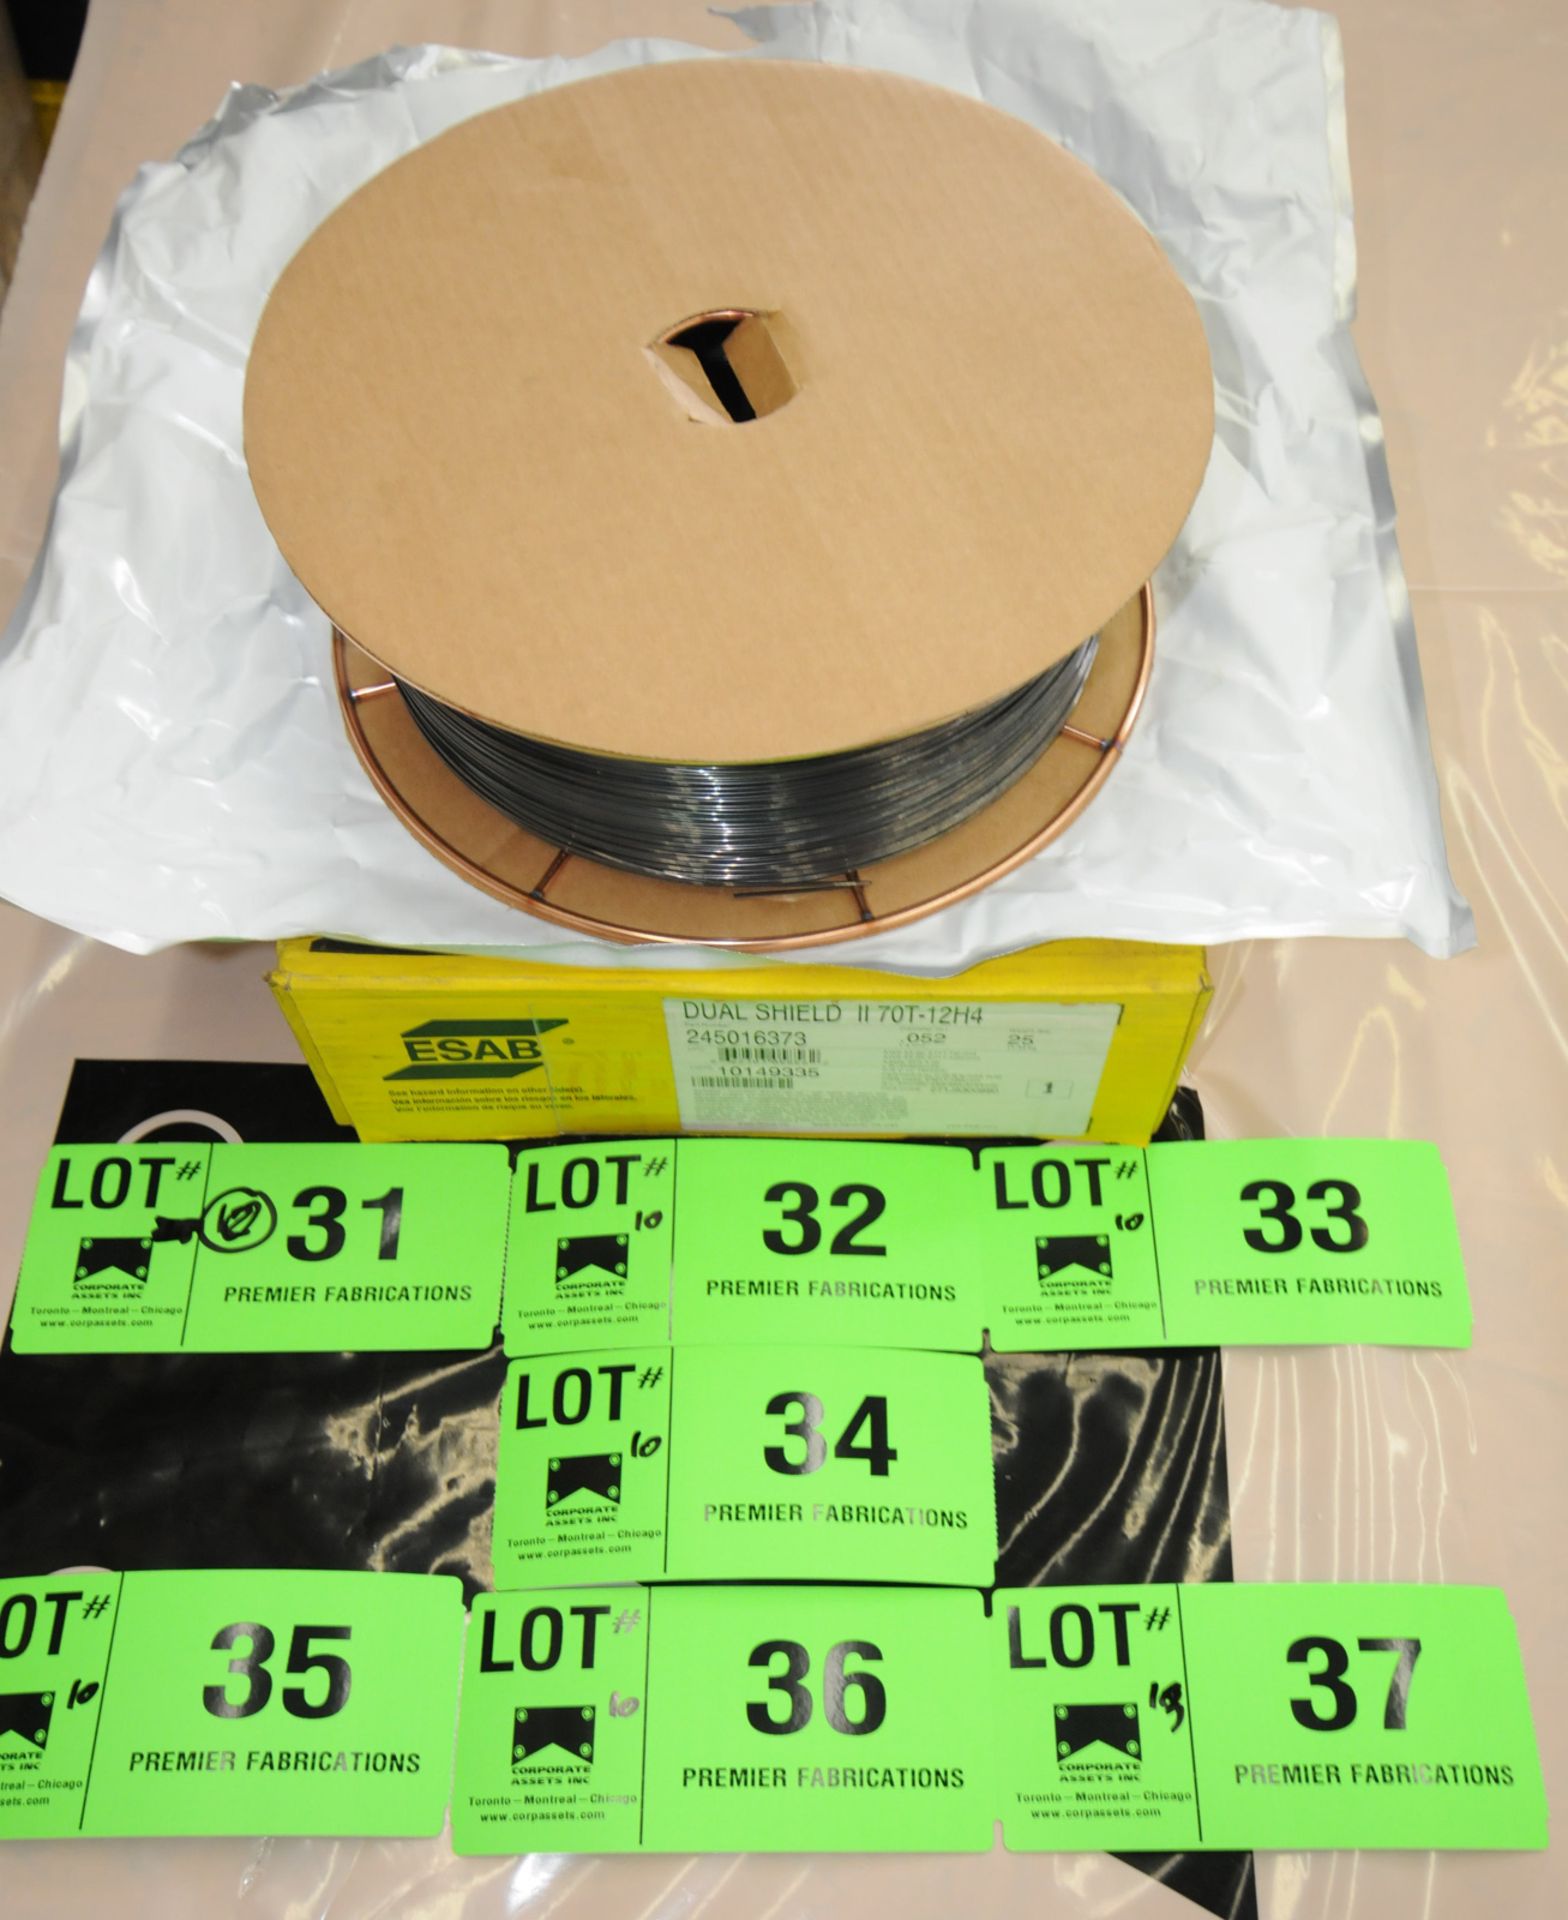 LOT/ (10) 25LB SPOOLS OF ESAB DUAL SHIELD II 70T-12H4 0.052" DIAMETER WELDING WIRE CONFORMING TO AWS